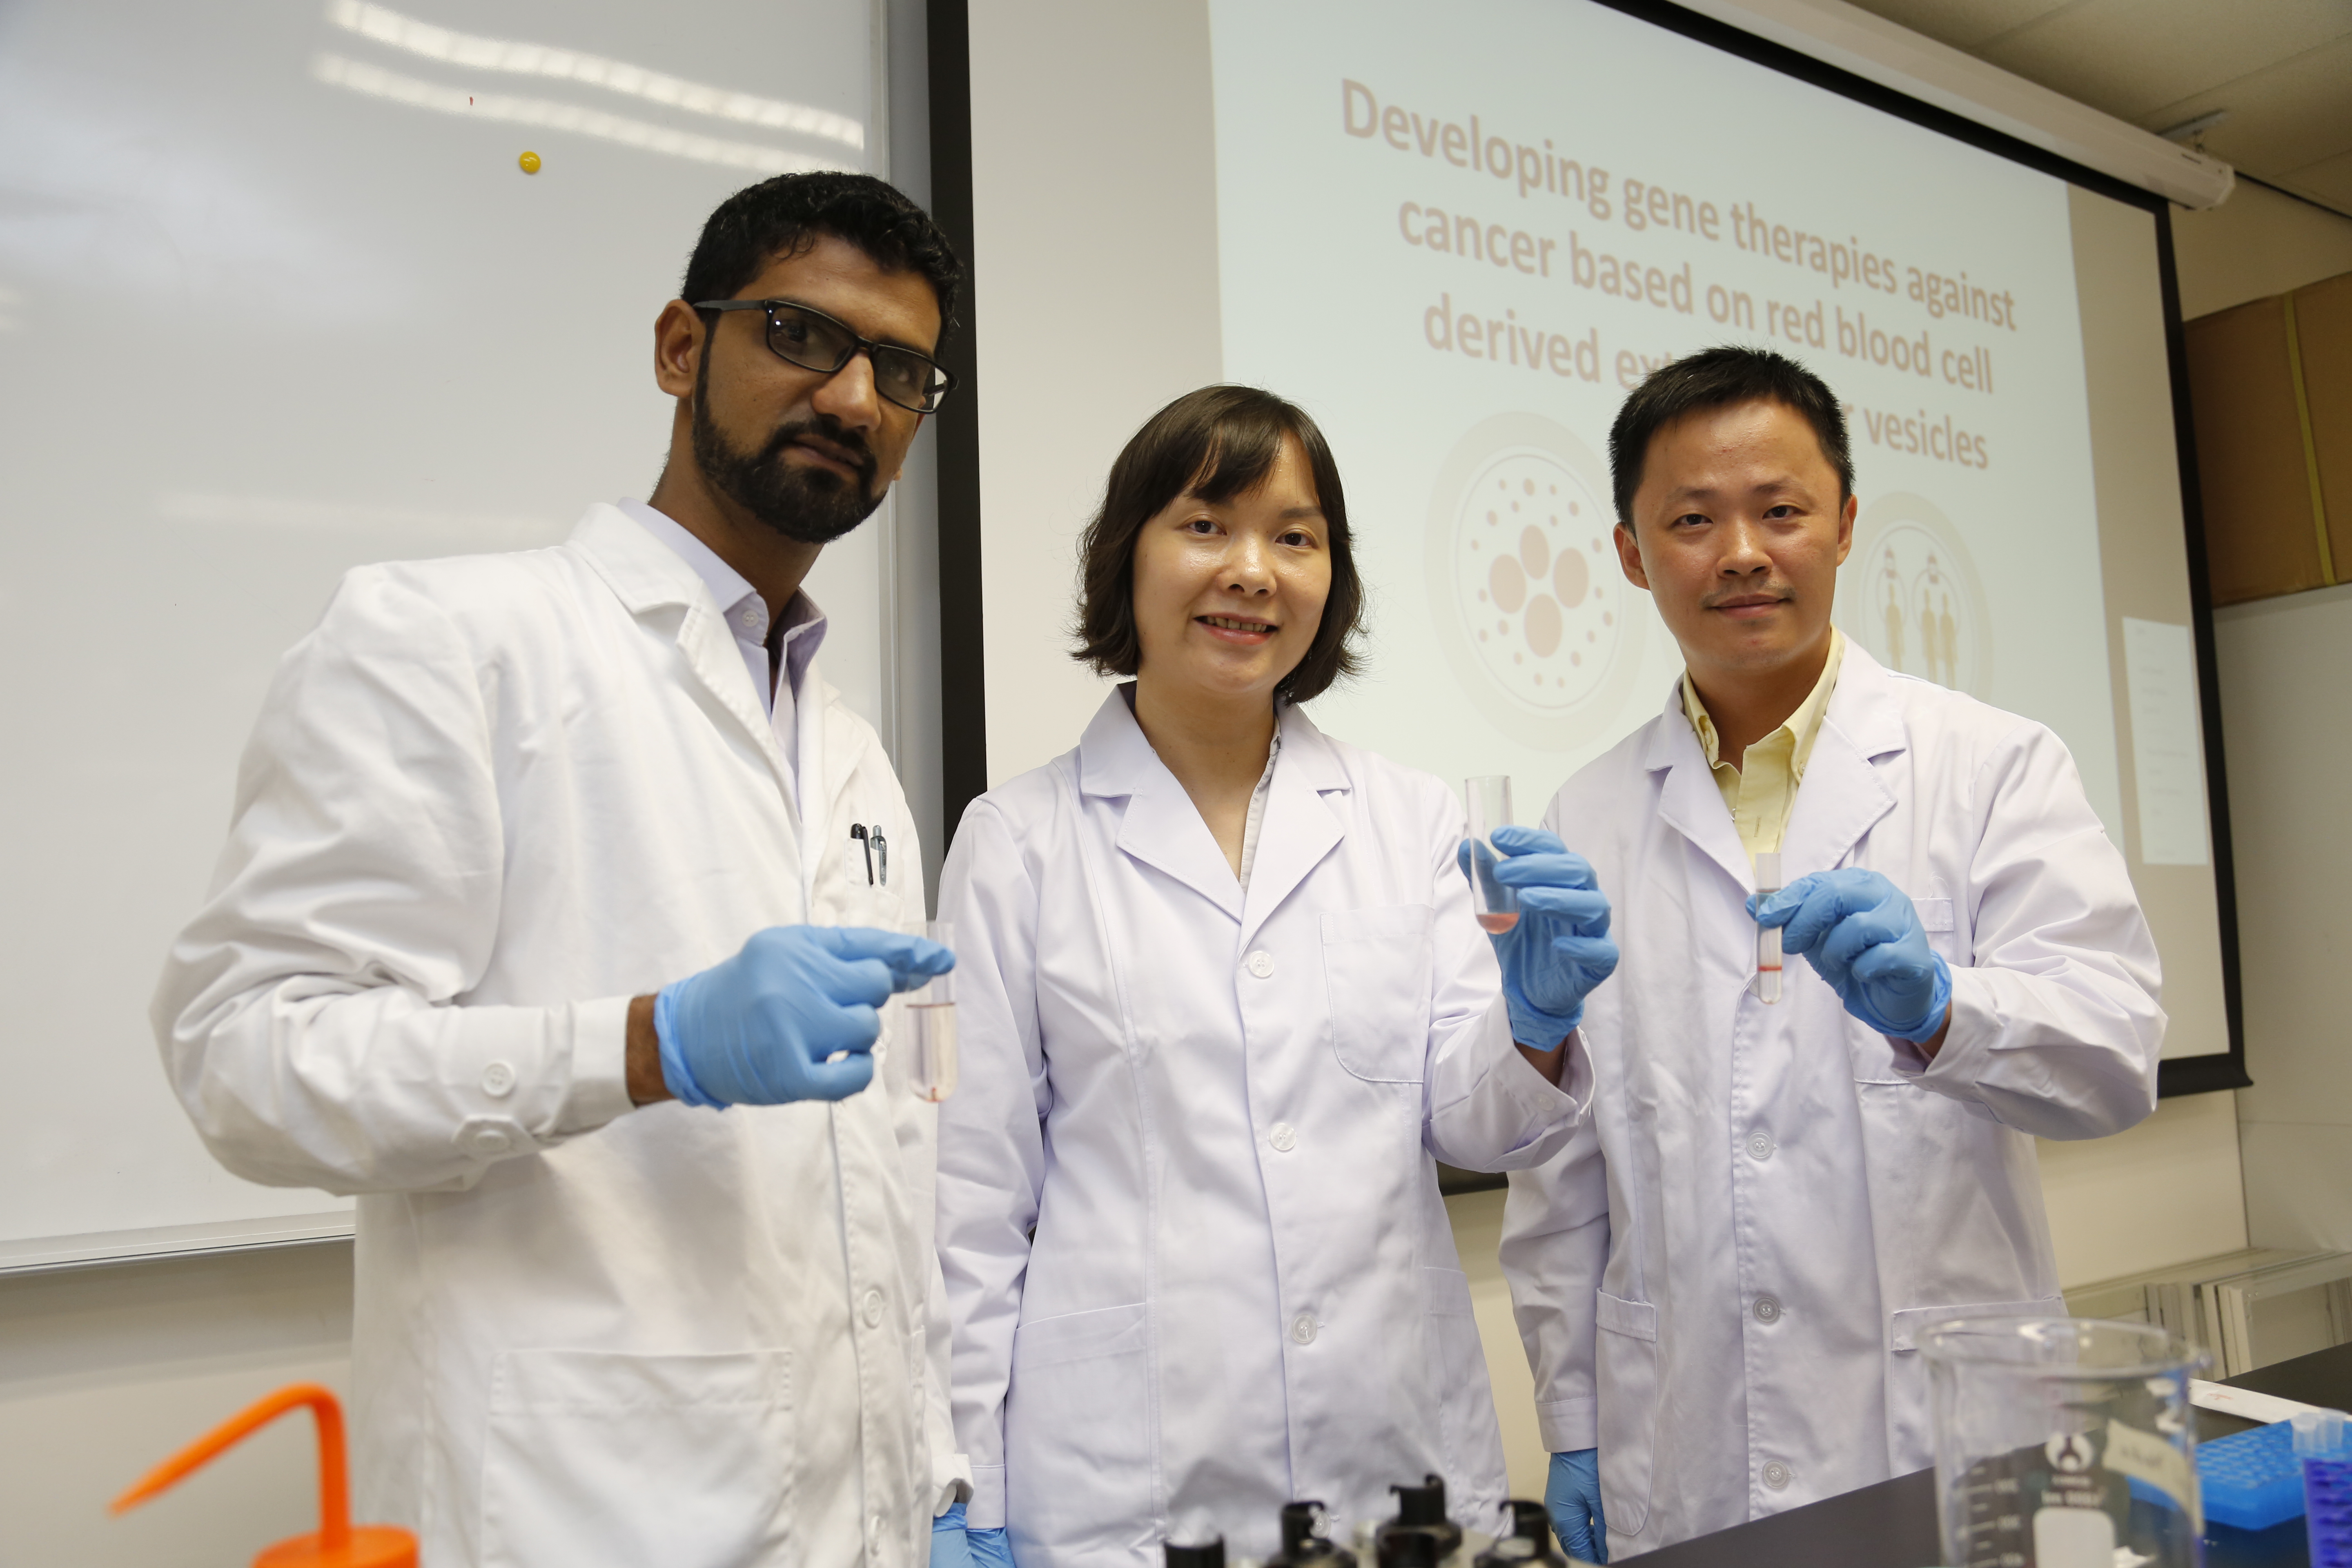 (From right) Dr Shi, Dr Le, and PhD student Waqas Muhammad Usman.